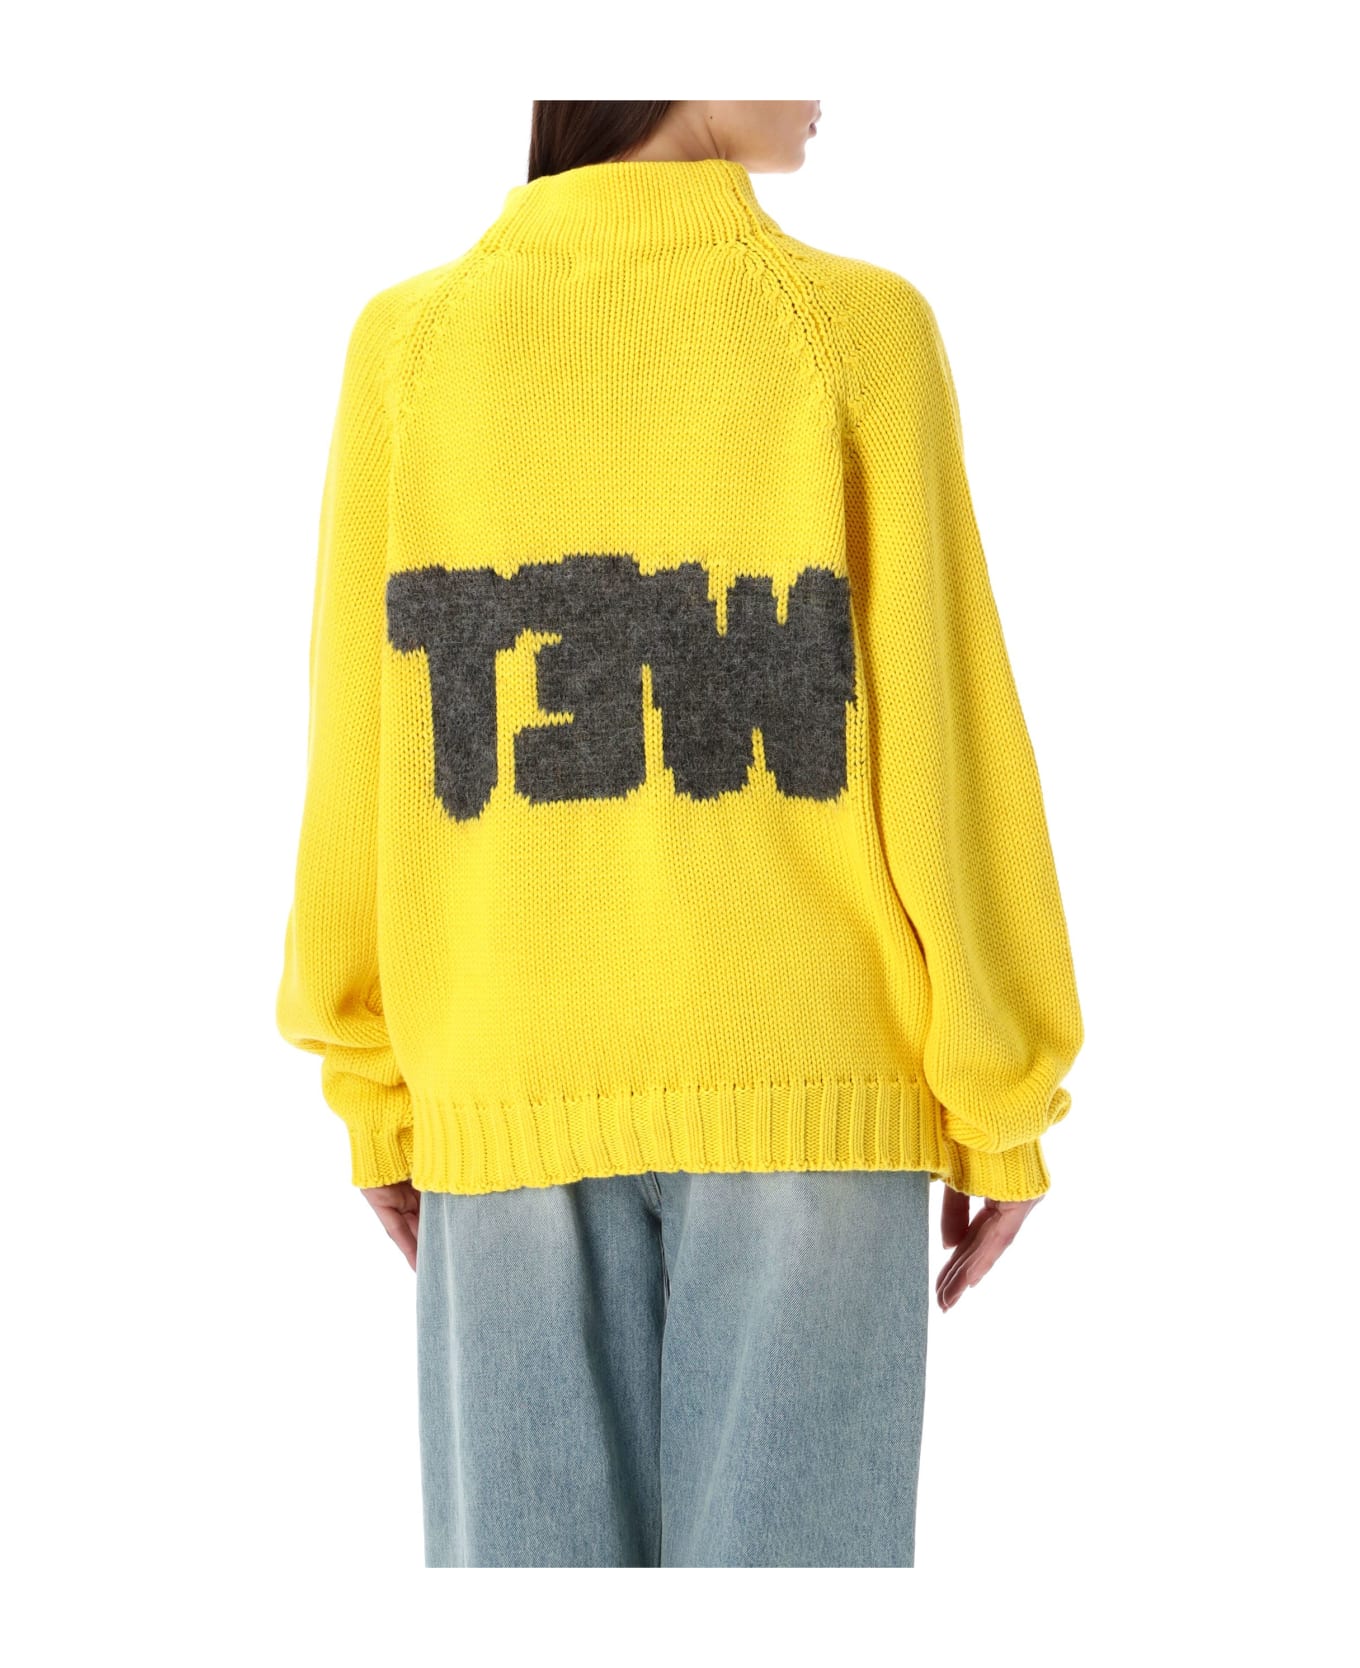 ERL Wet Sweater - YELLOW